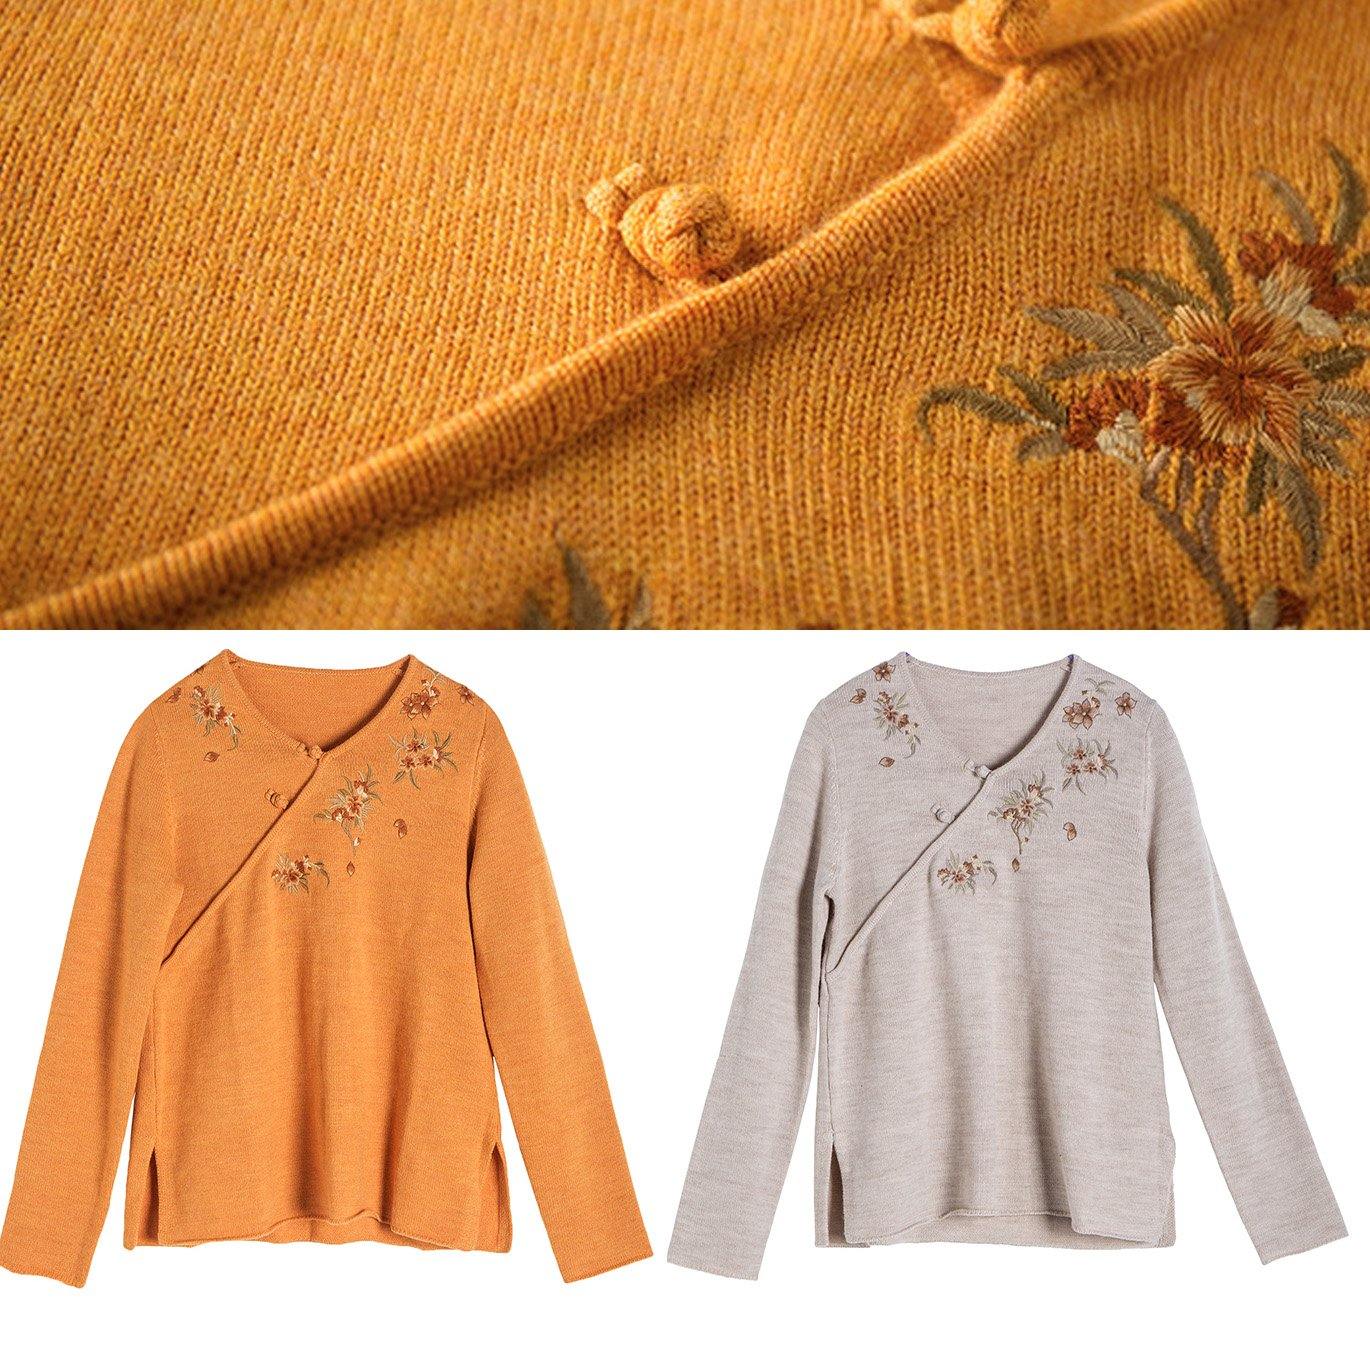 Women Spring Yellow Embroidery Knitwear V Neck Knit Top - Omychic